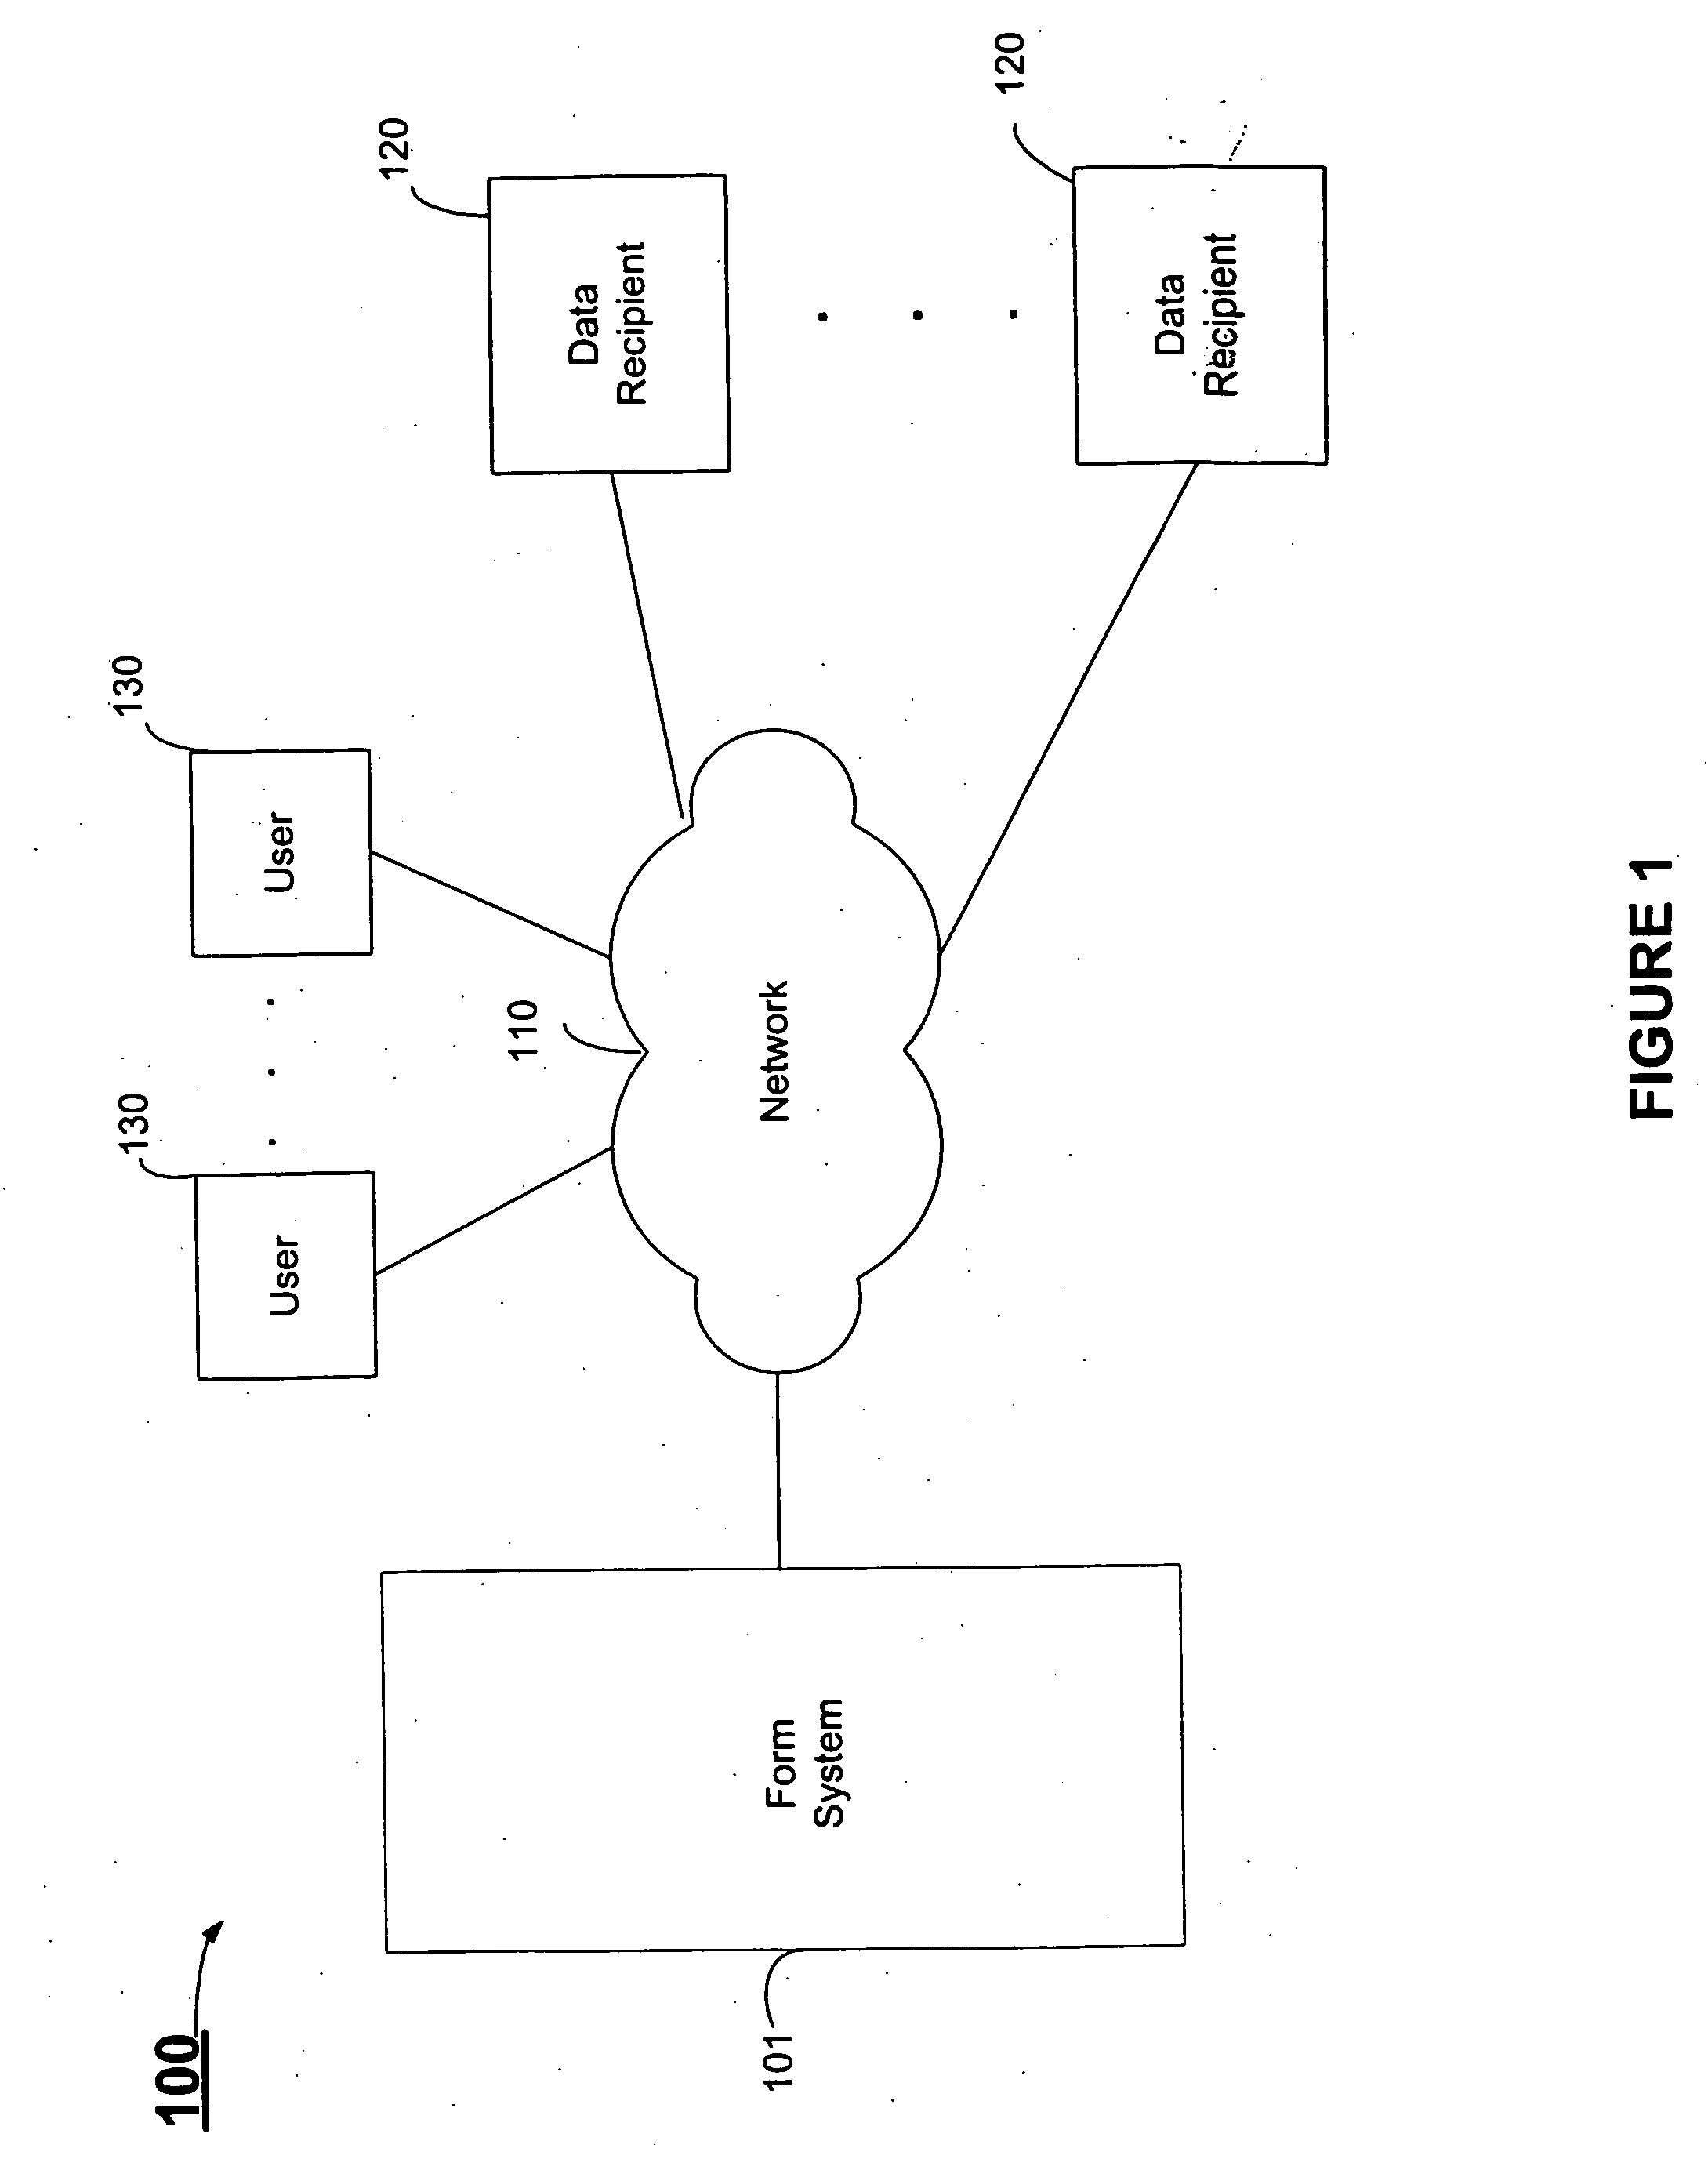 Systems and methods for storing personal information, automatically filling out forms, and sharing information with a data recipient